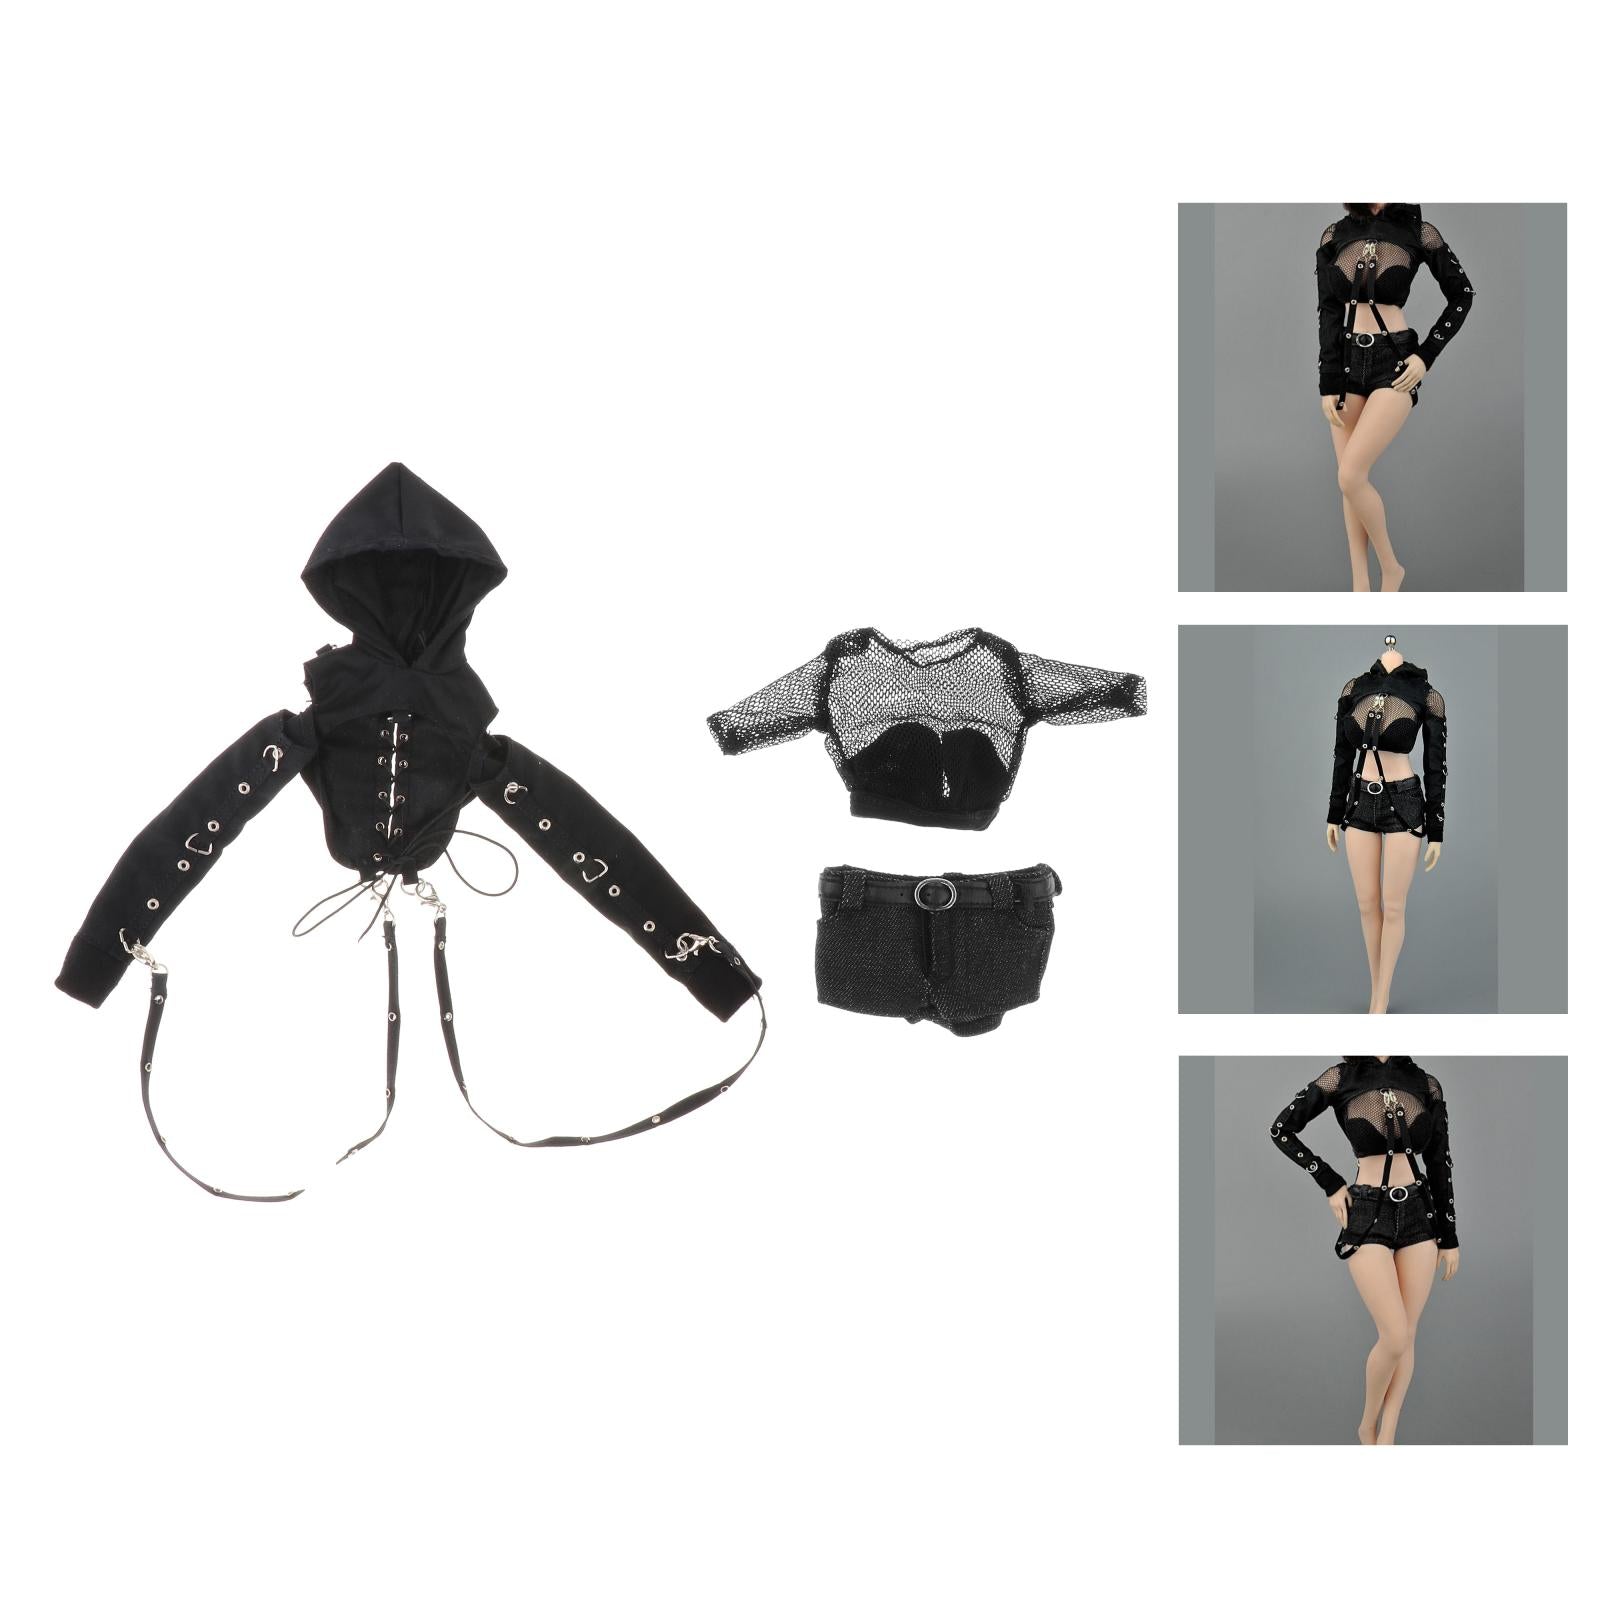 Well-Made 1:6 Scale Lady Action Figure Hooded Top Black for 12 Inch Doll